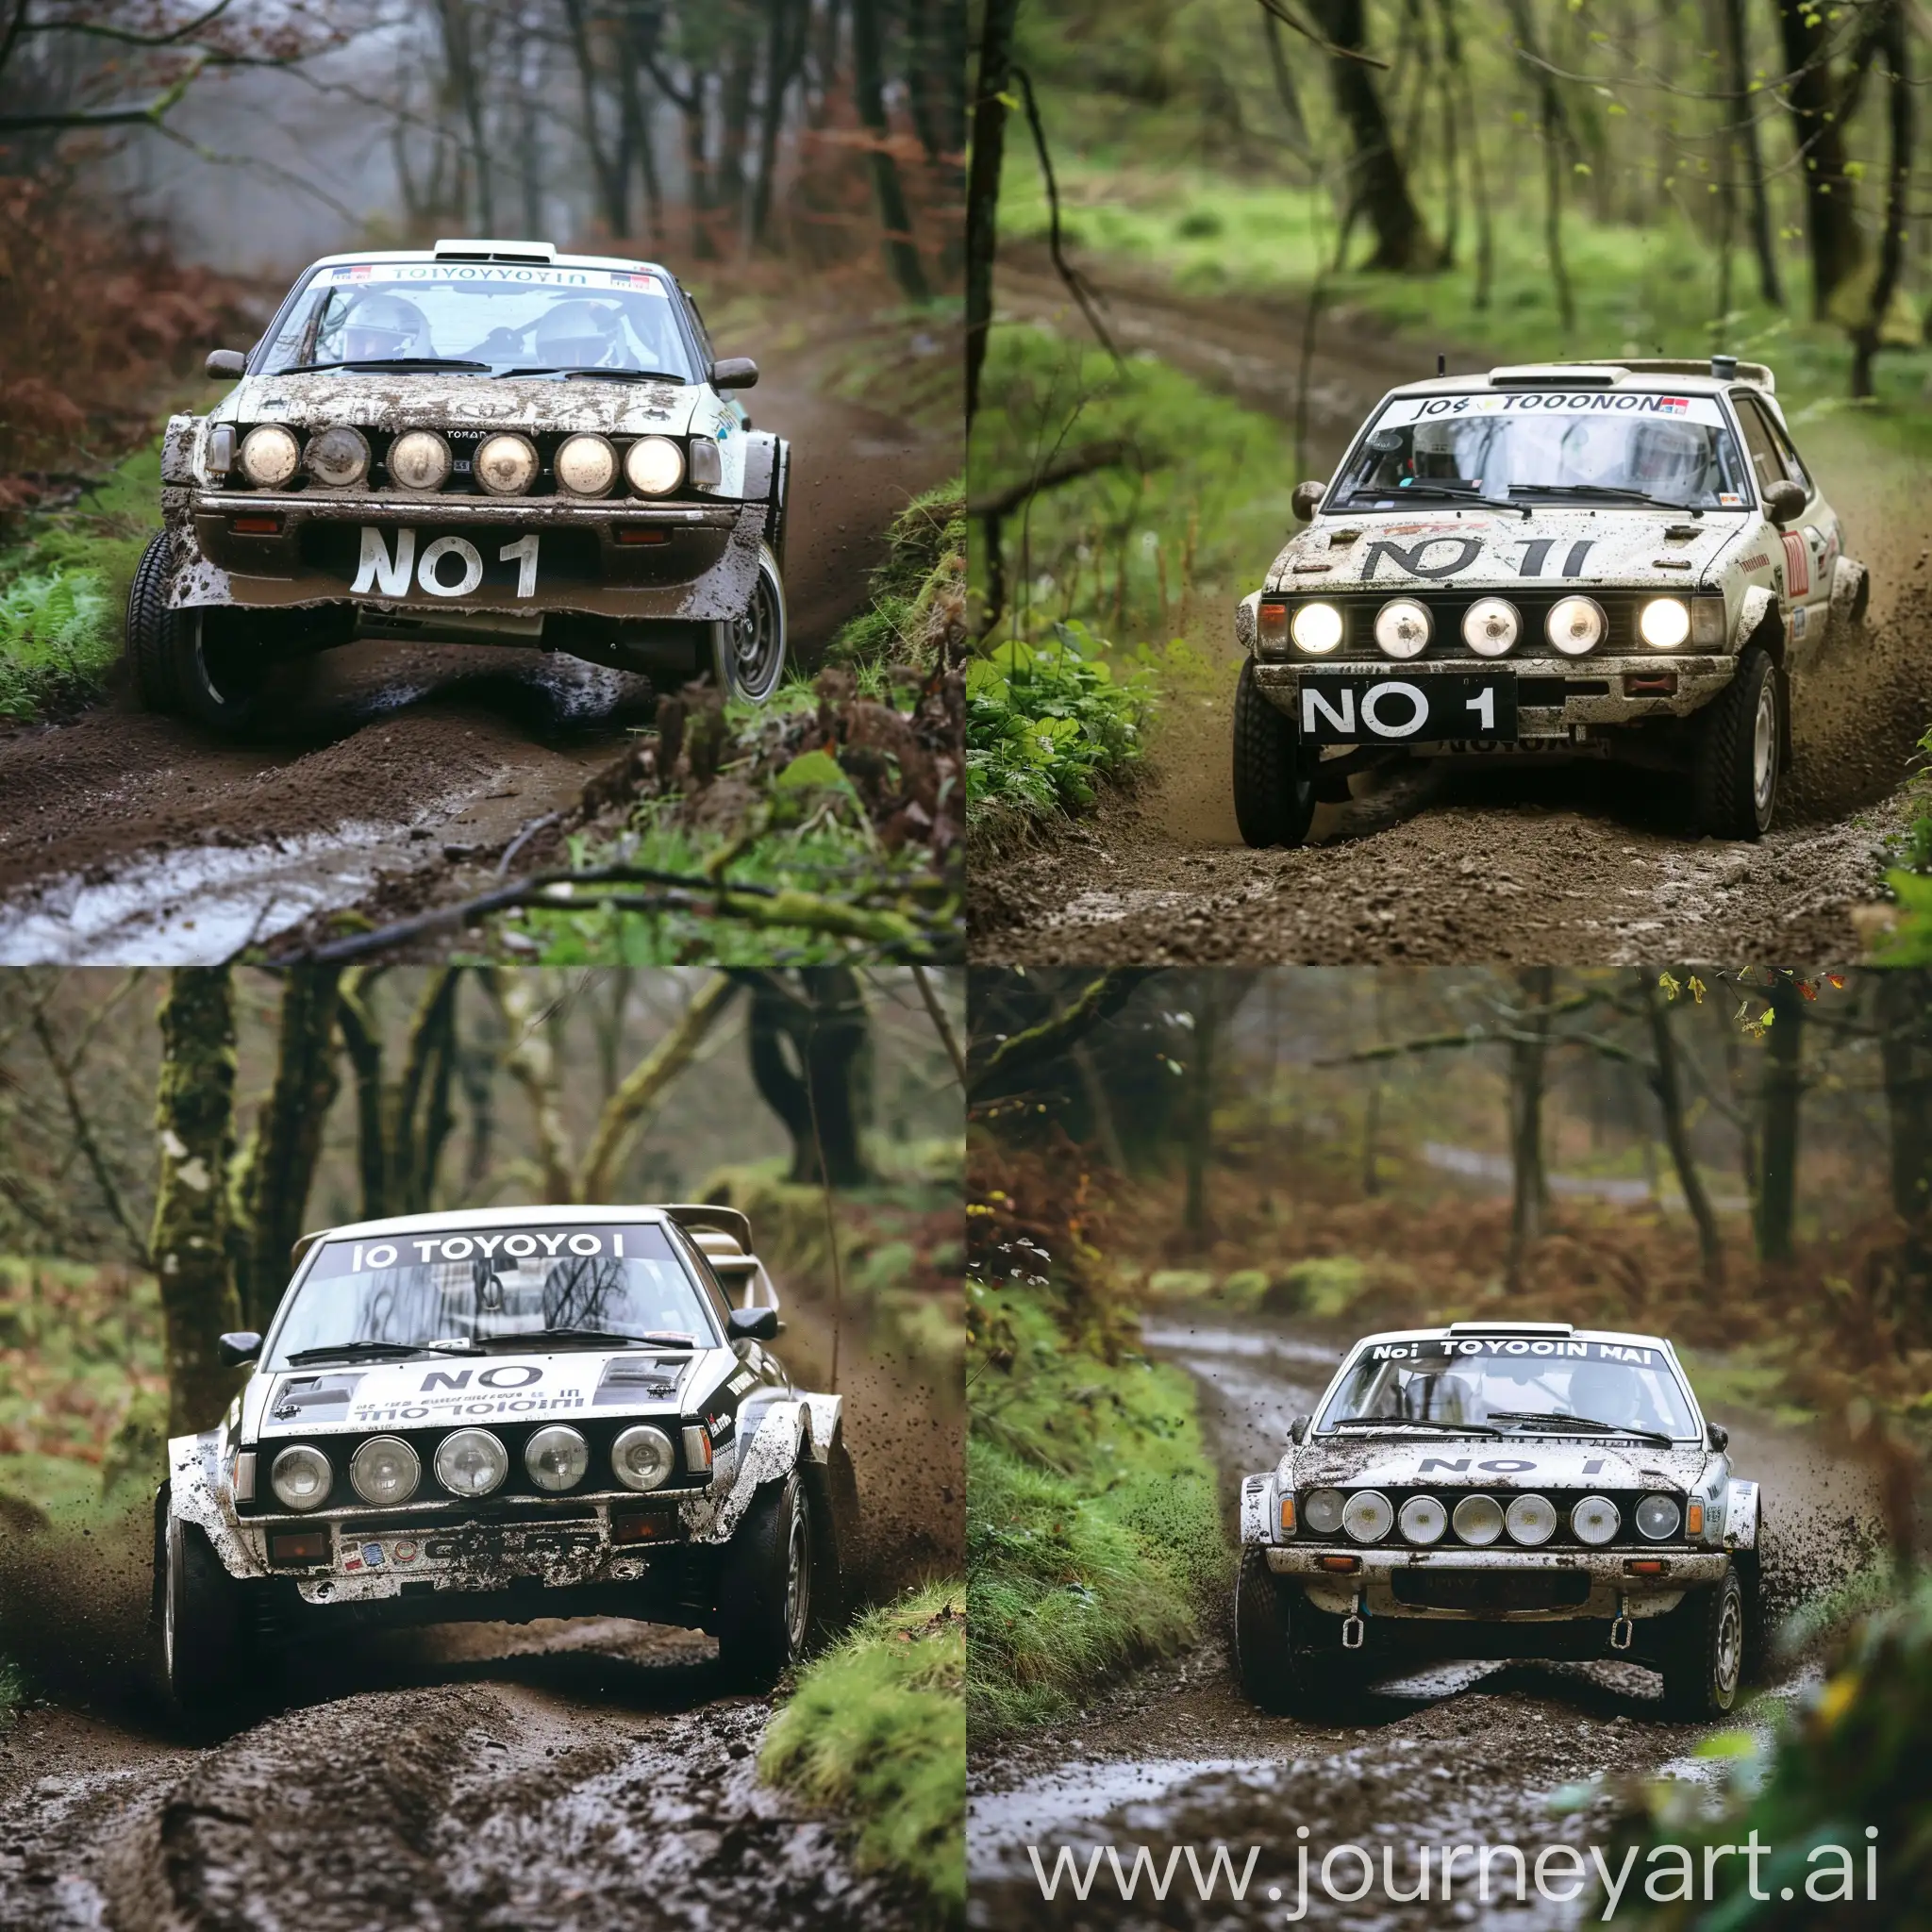 A Toyota rally car is driving on a dirt trail in the woods. The car is covered in mud and dust. The front of the car has five lights in a row. The windshield is large and clear. The car has a Toyota logo on the front and the word \"No1\" on the side. The wheels are black and round with white rims. The dirt trail is surrounded by green grass and trees As photographed by Josselin Cornillon-Maillard in a winter mud forest background --v 6 --style raw --s 100